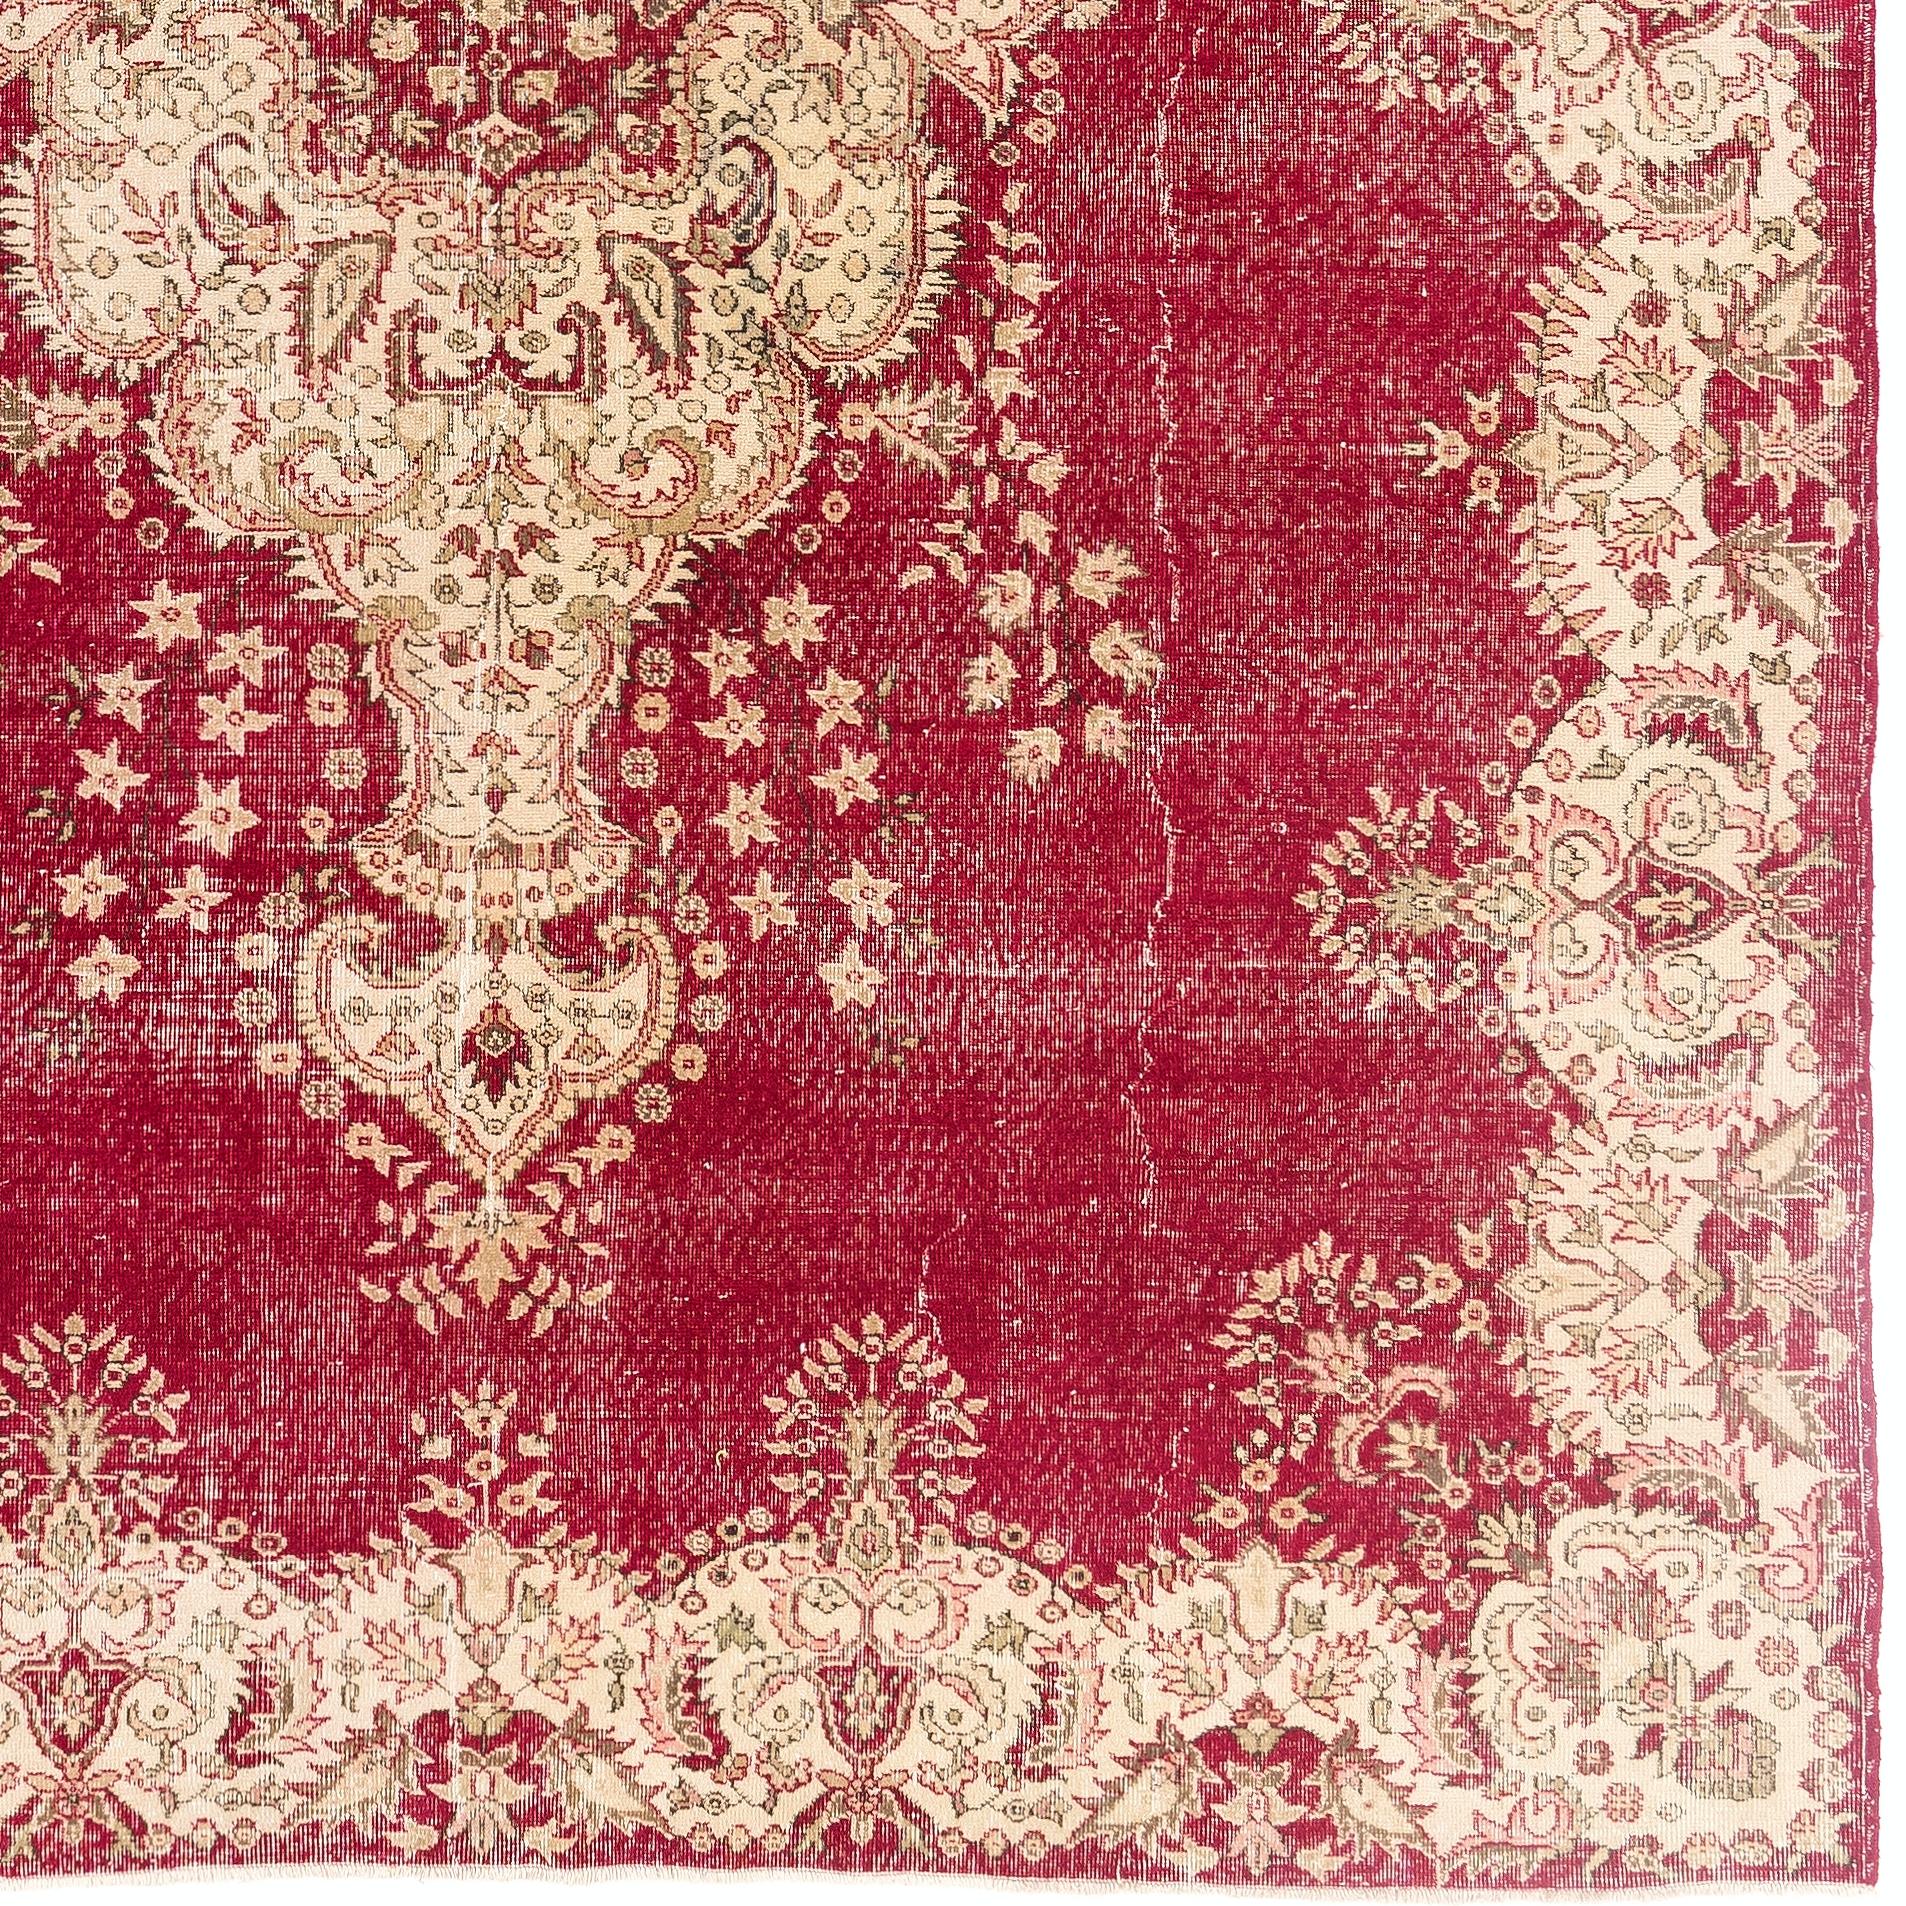 Hand-Woven 9x12.3 Ft Vintage Oriental Carpet. Traditional Turkish Wool Rug in Red and Beige For Sale